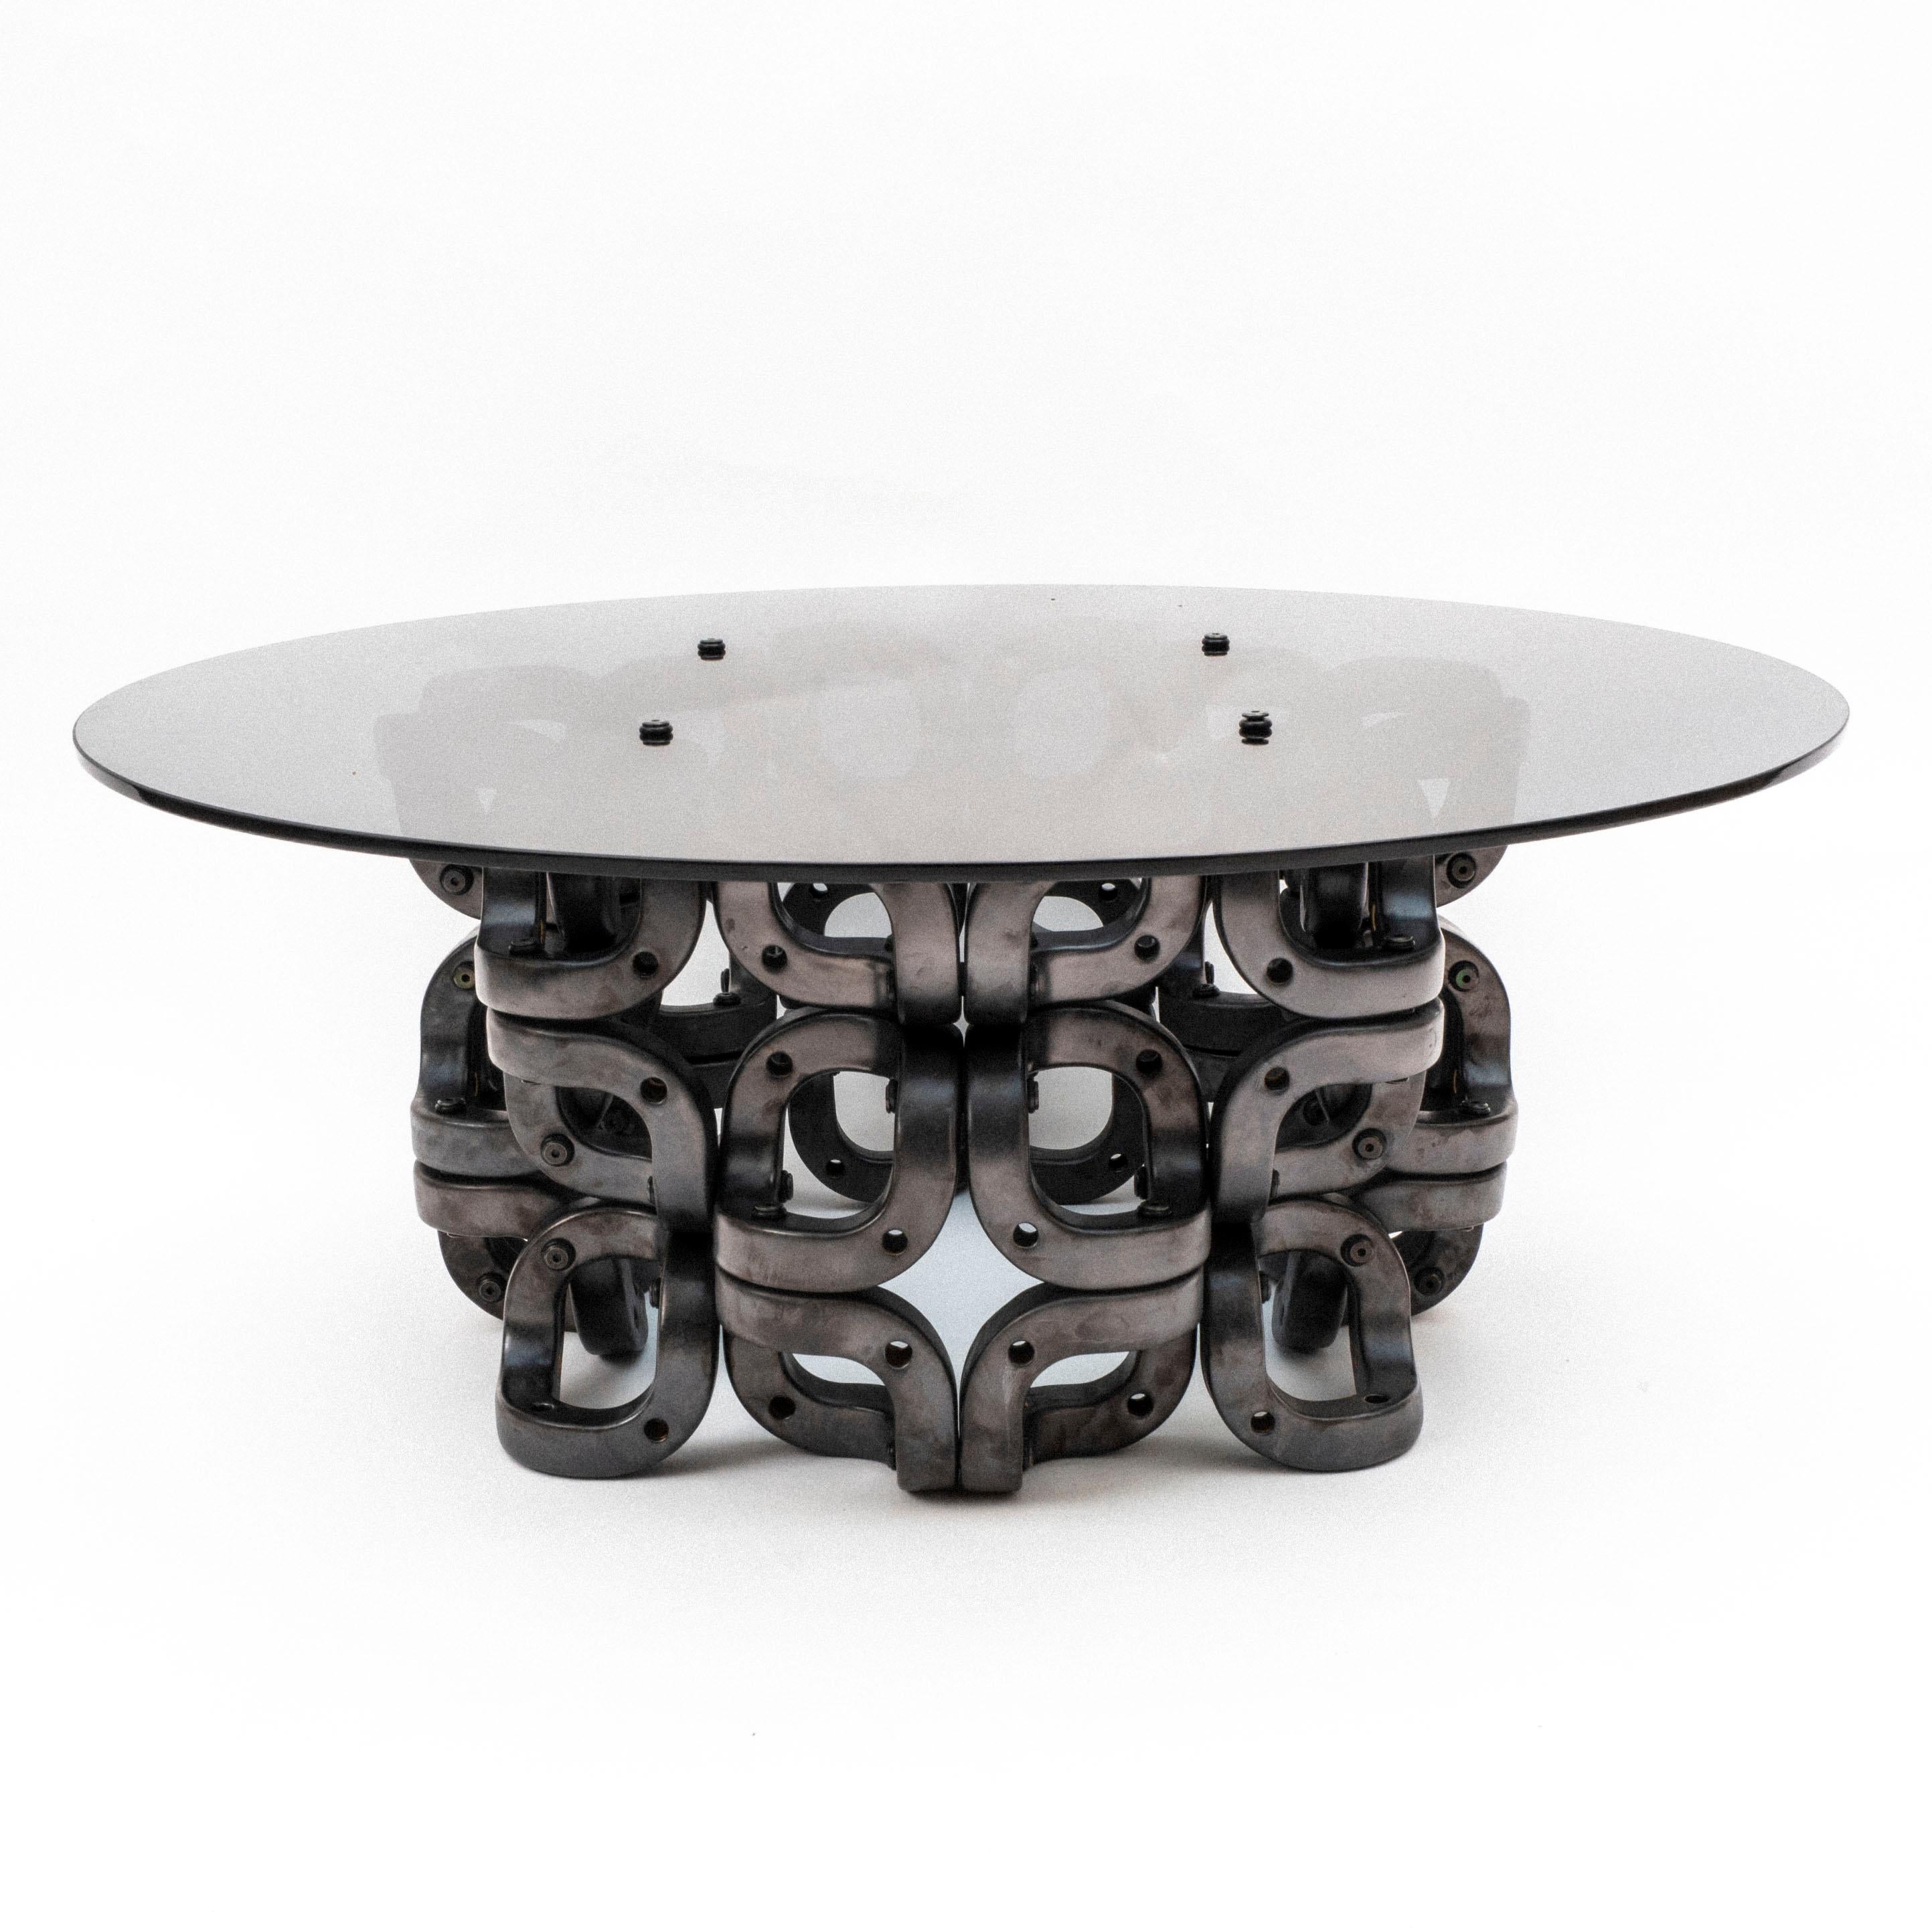 Enameled Laila; Modular Geometric Contemporary Ceramic and Glass Table by Pedro Cerisola For Sale